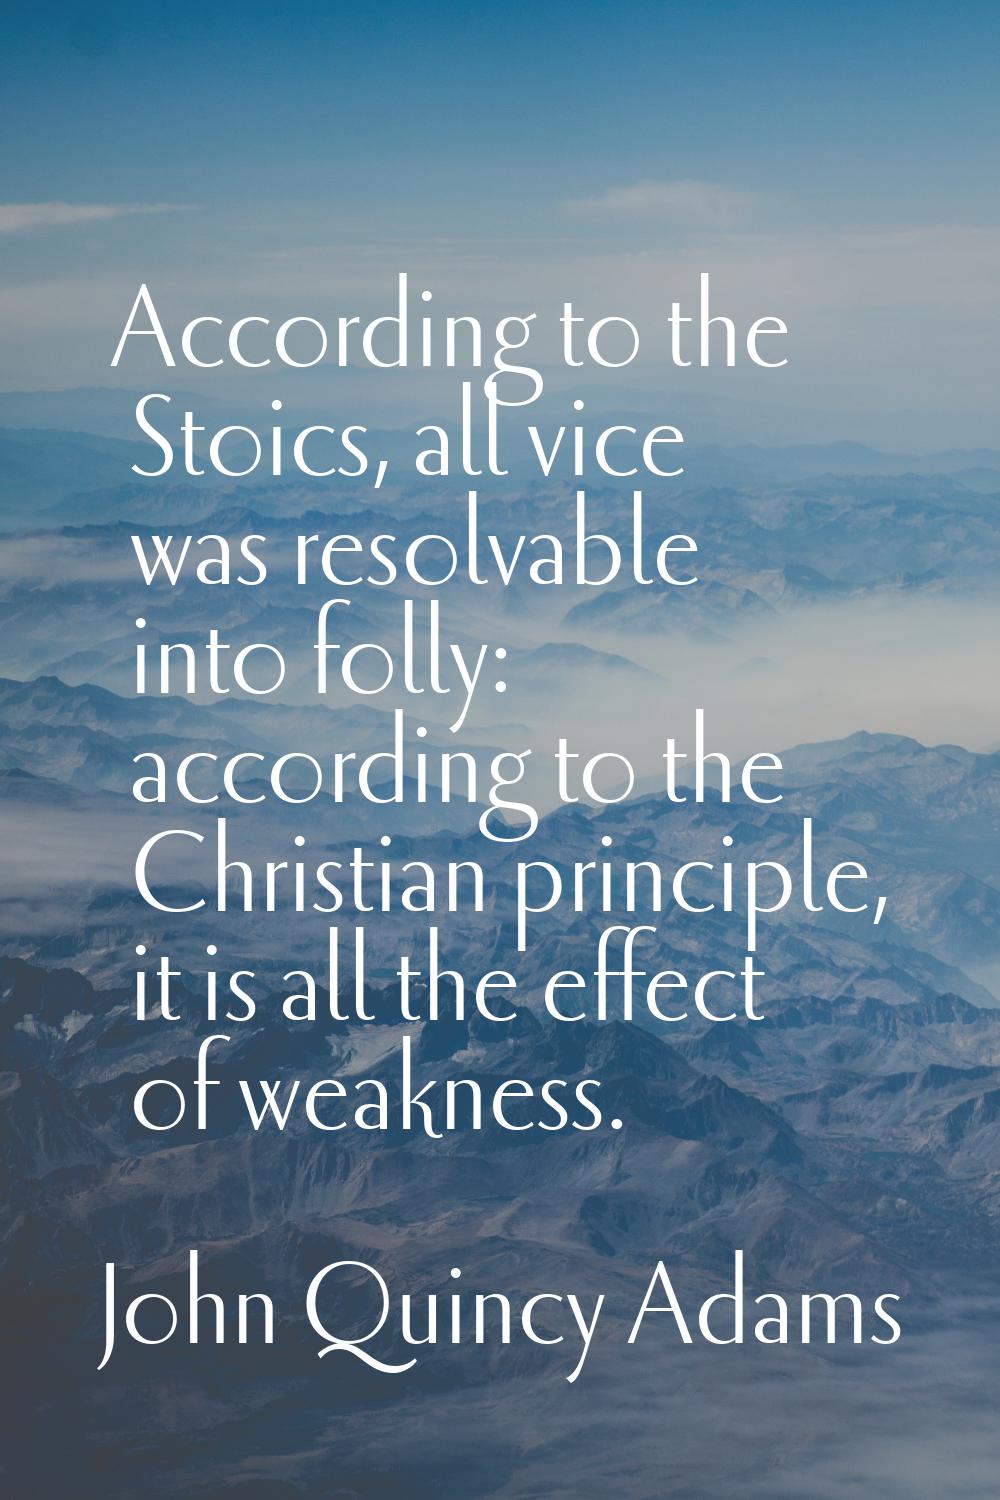 According to the Stoics, all vice was resolvable into folly: according to the Christian principle, 